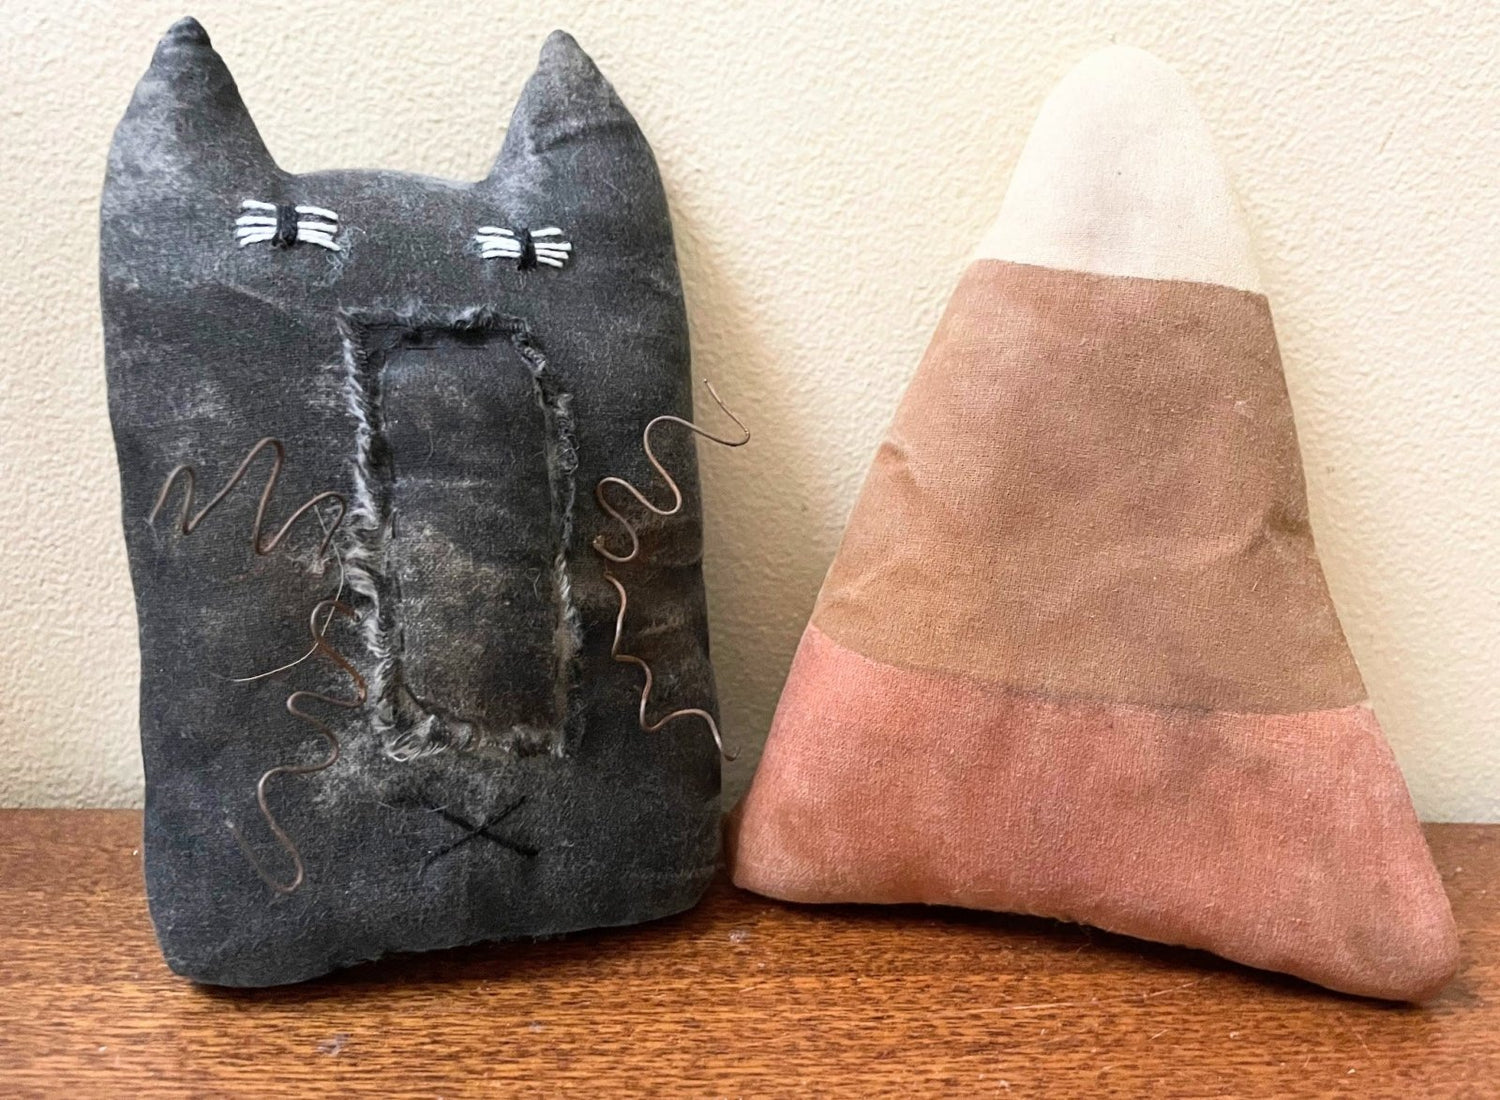 Primitive Fall Halloween Handcrafted Black Kats and Primitive Candy Corn 2 pc Set - The Primitive Pineapple Collection